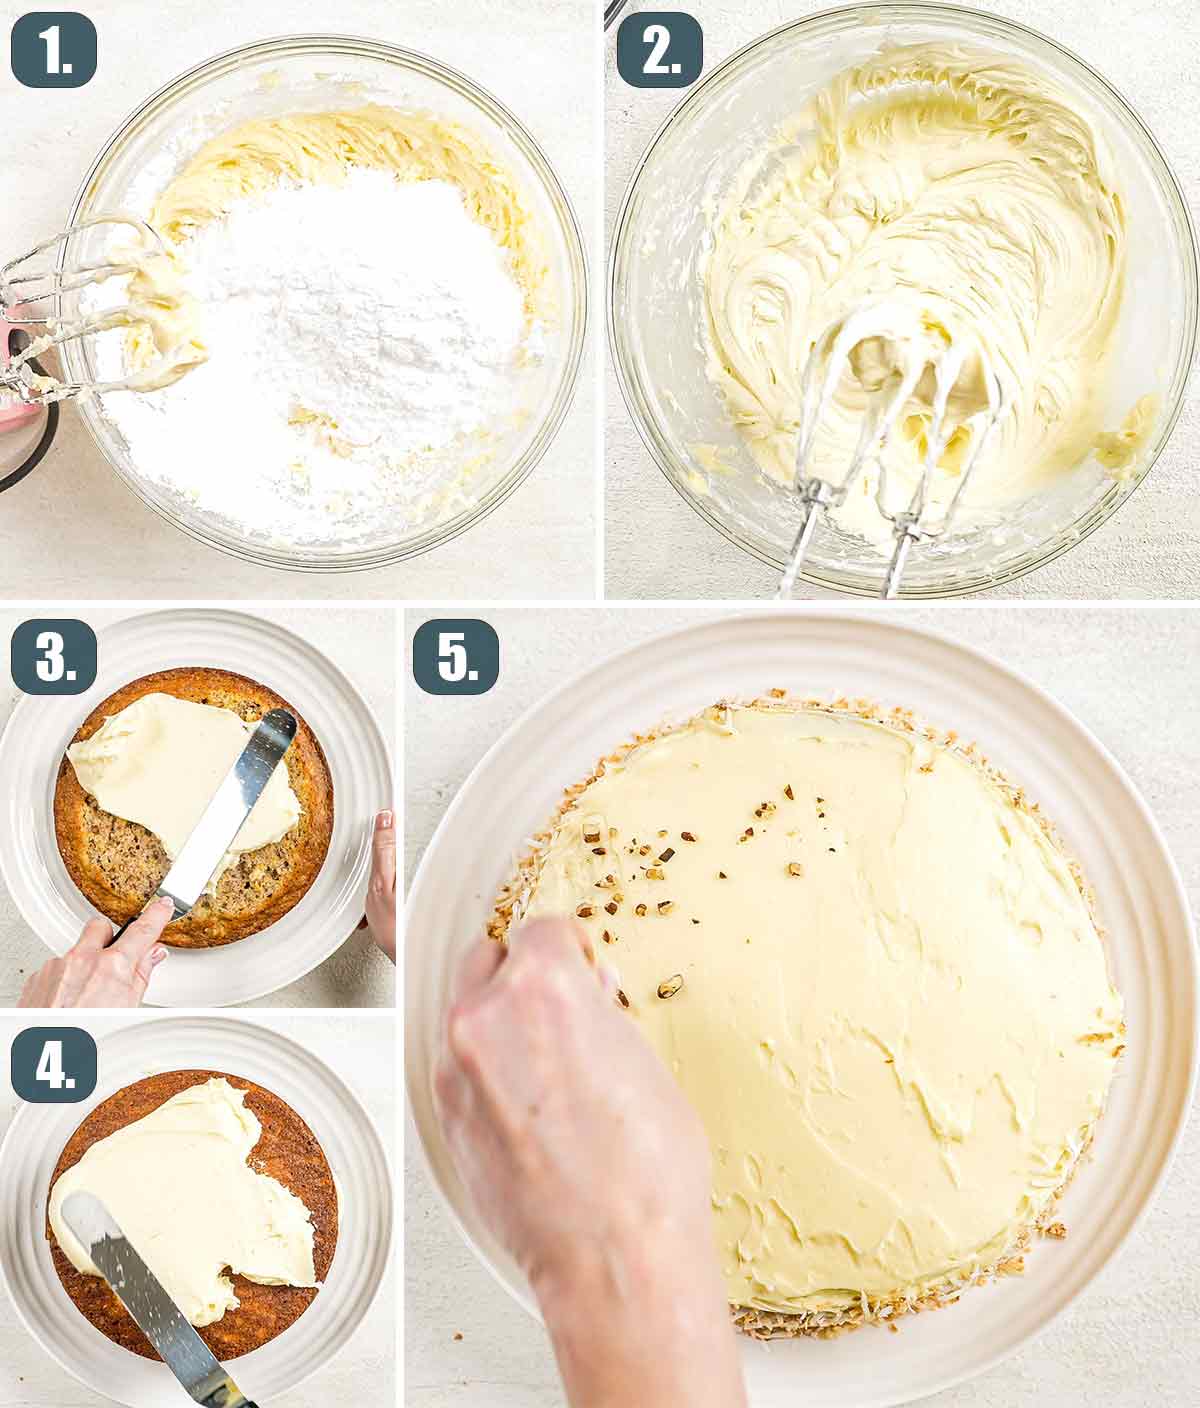 detailed process shots showing how to make cream cheese frosting.